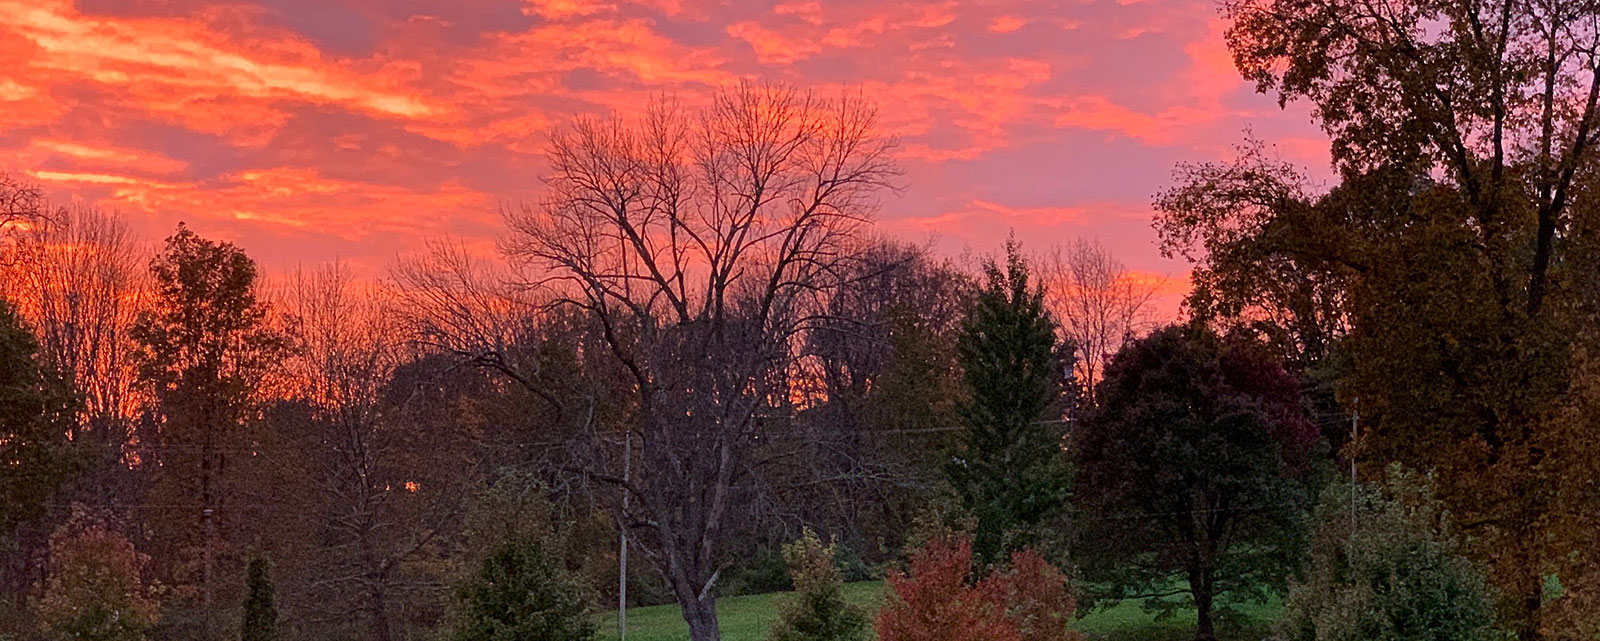 image of sunset in frankford township, county fairgrounds